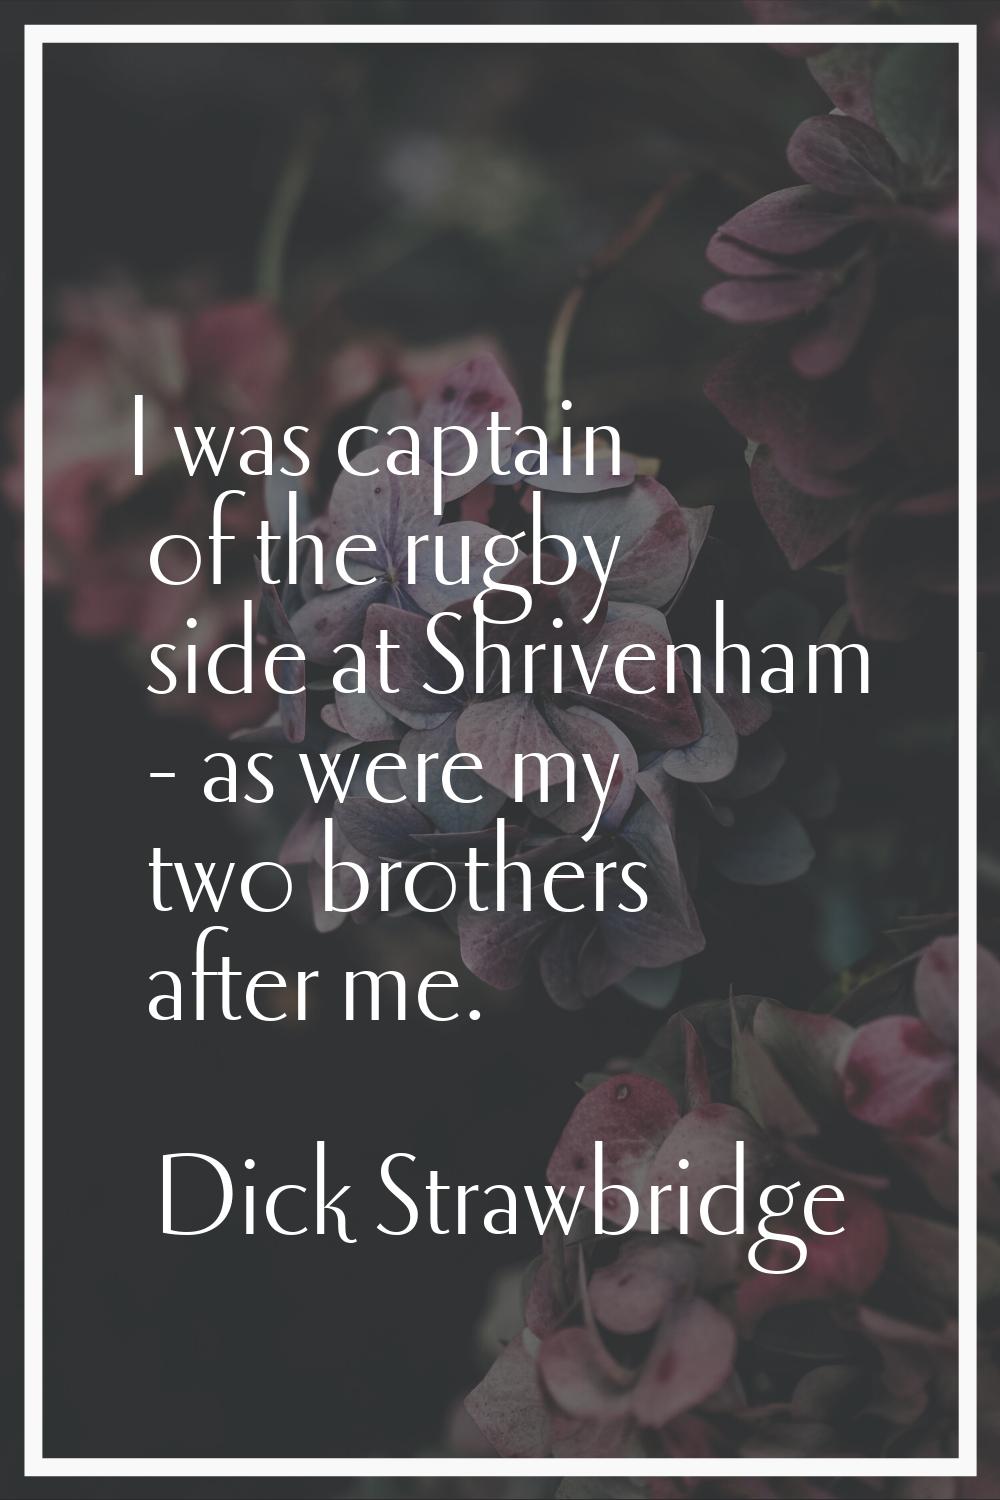 I was captain of the rugby side at Shrivenham - as were my two brothers after me.